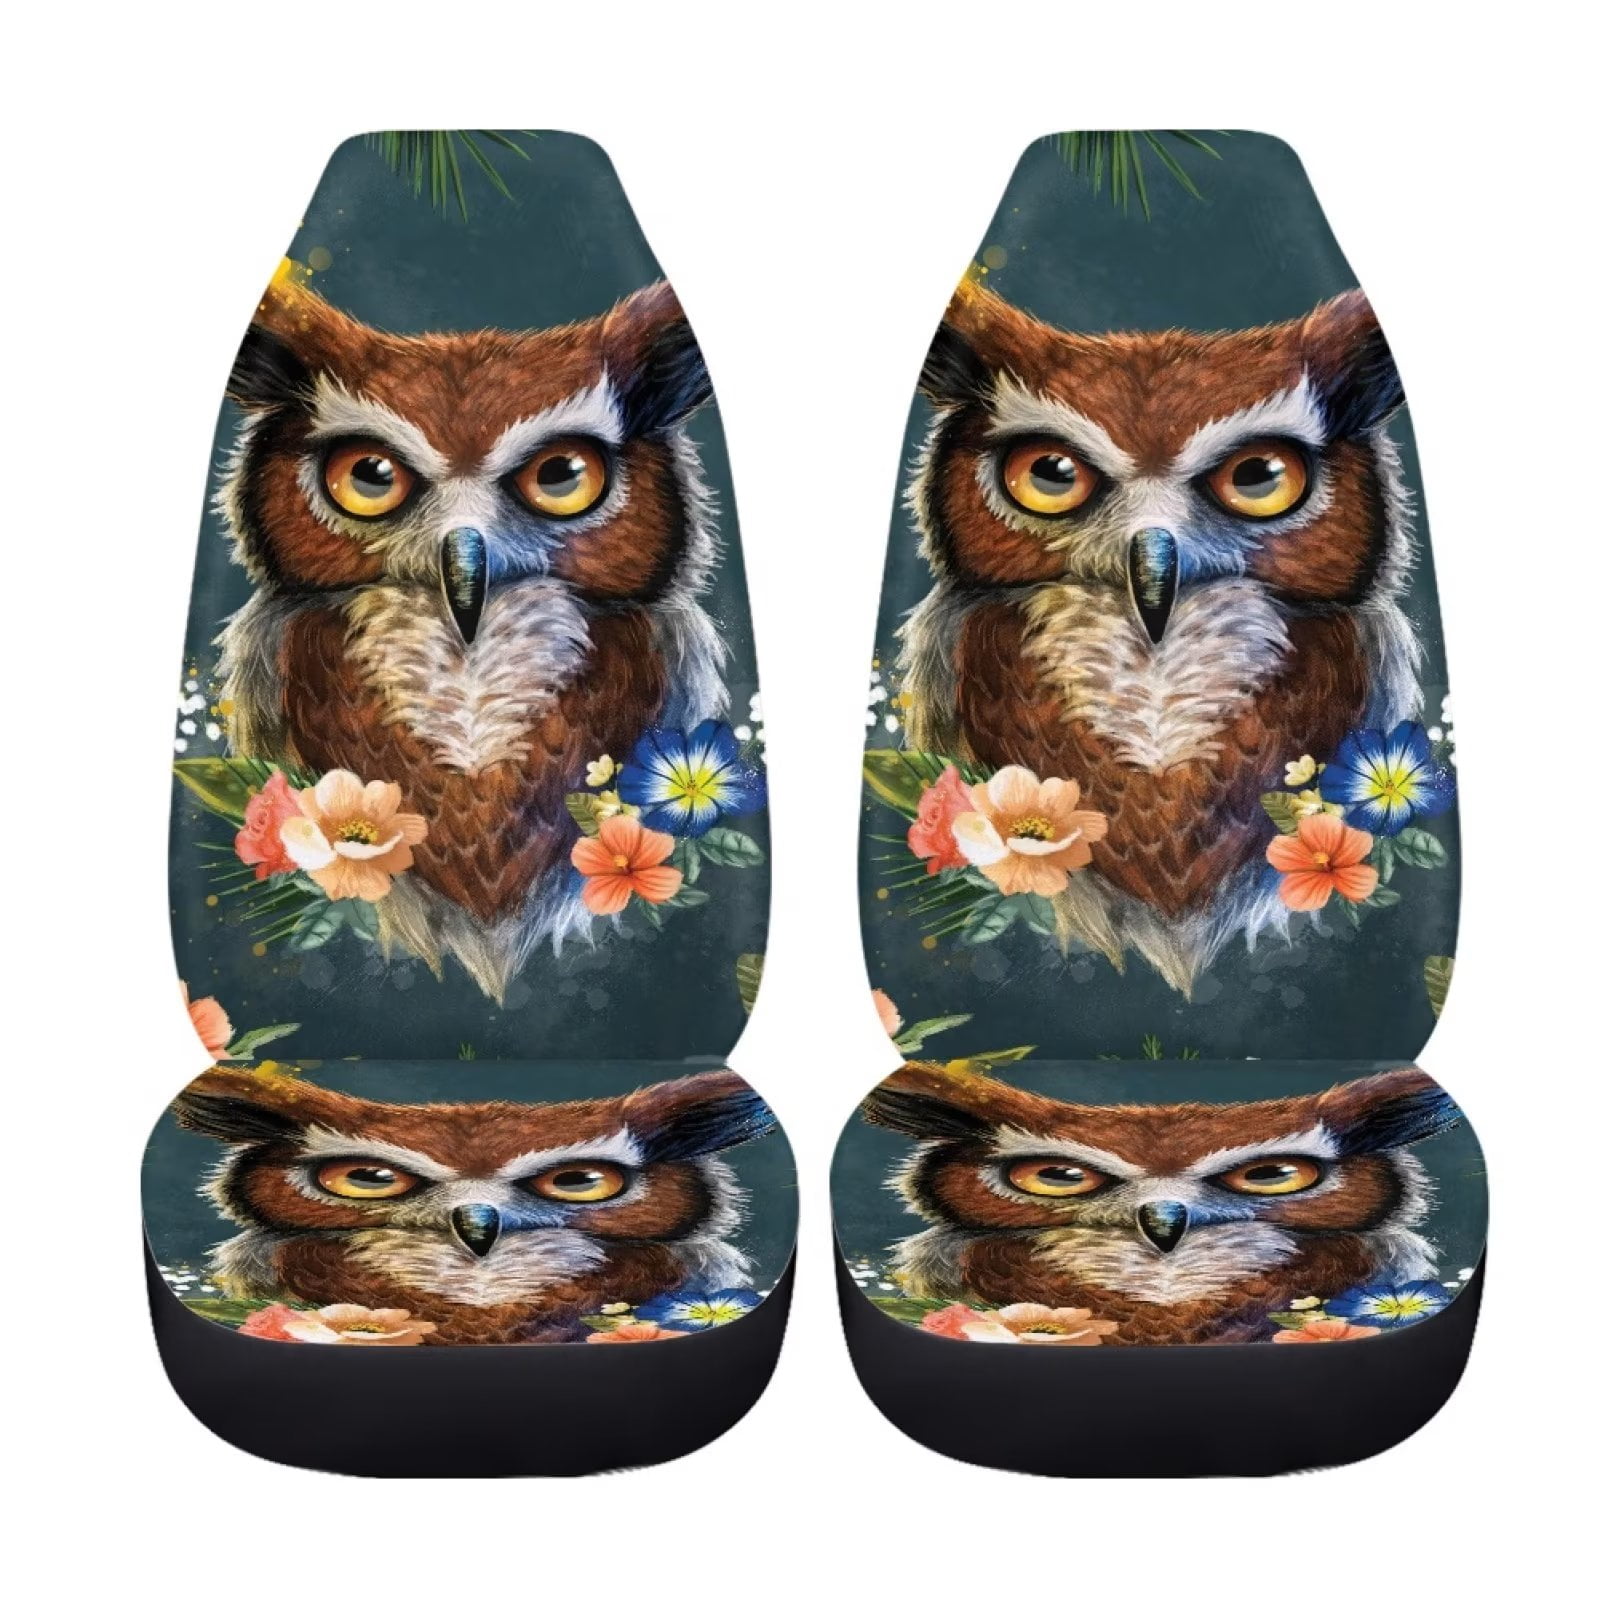 FKELYI Hummingbird Interior Car Seat Covers Accessories Set for Women Front  and Back Breathable Polyester Backrest Cover for Cars,Vans,SUVs and Trucks,Floral  Car Decor 